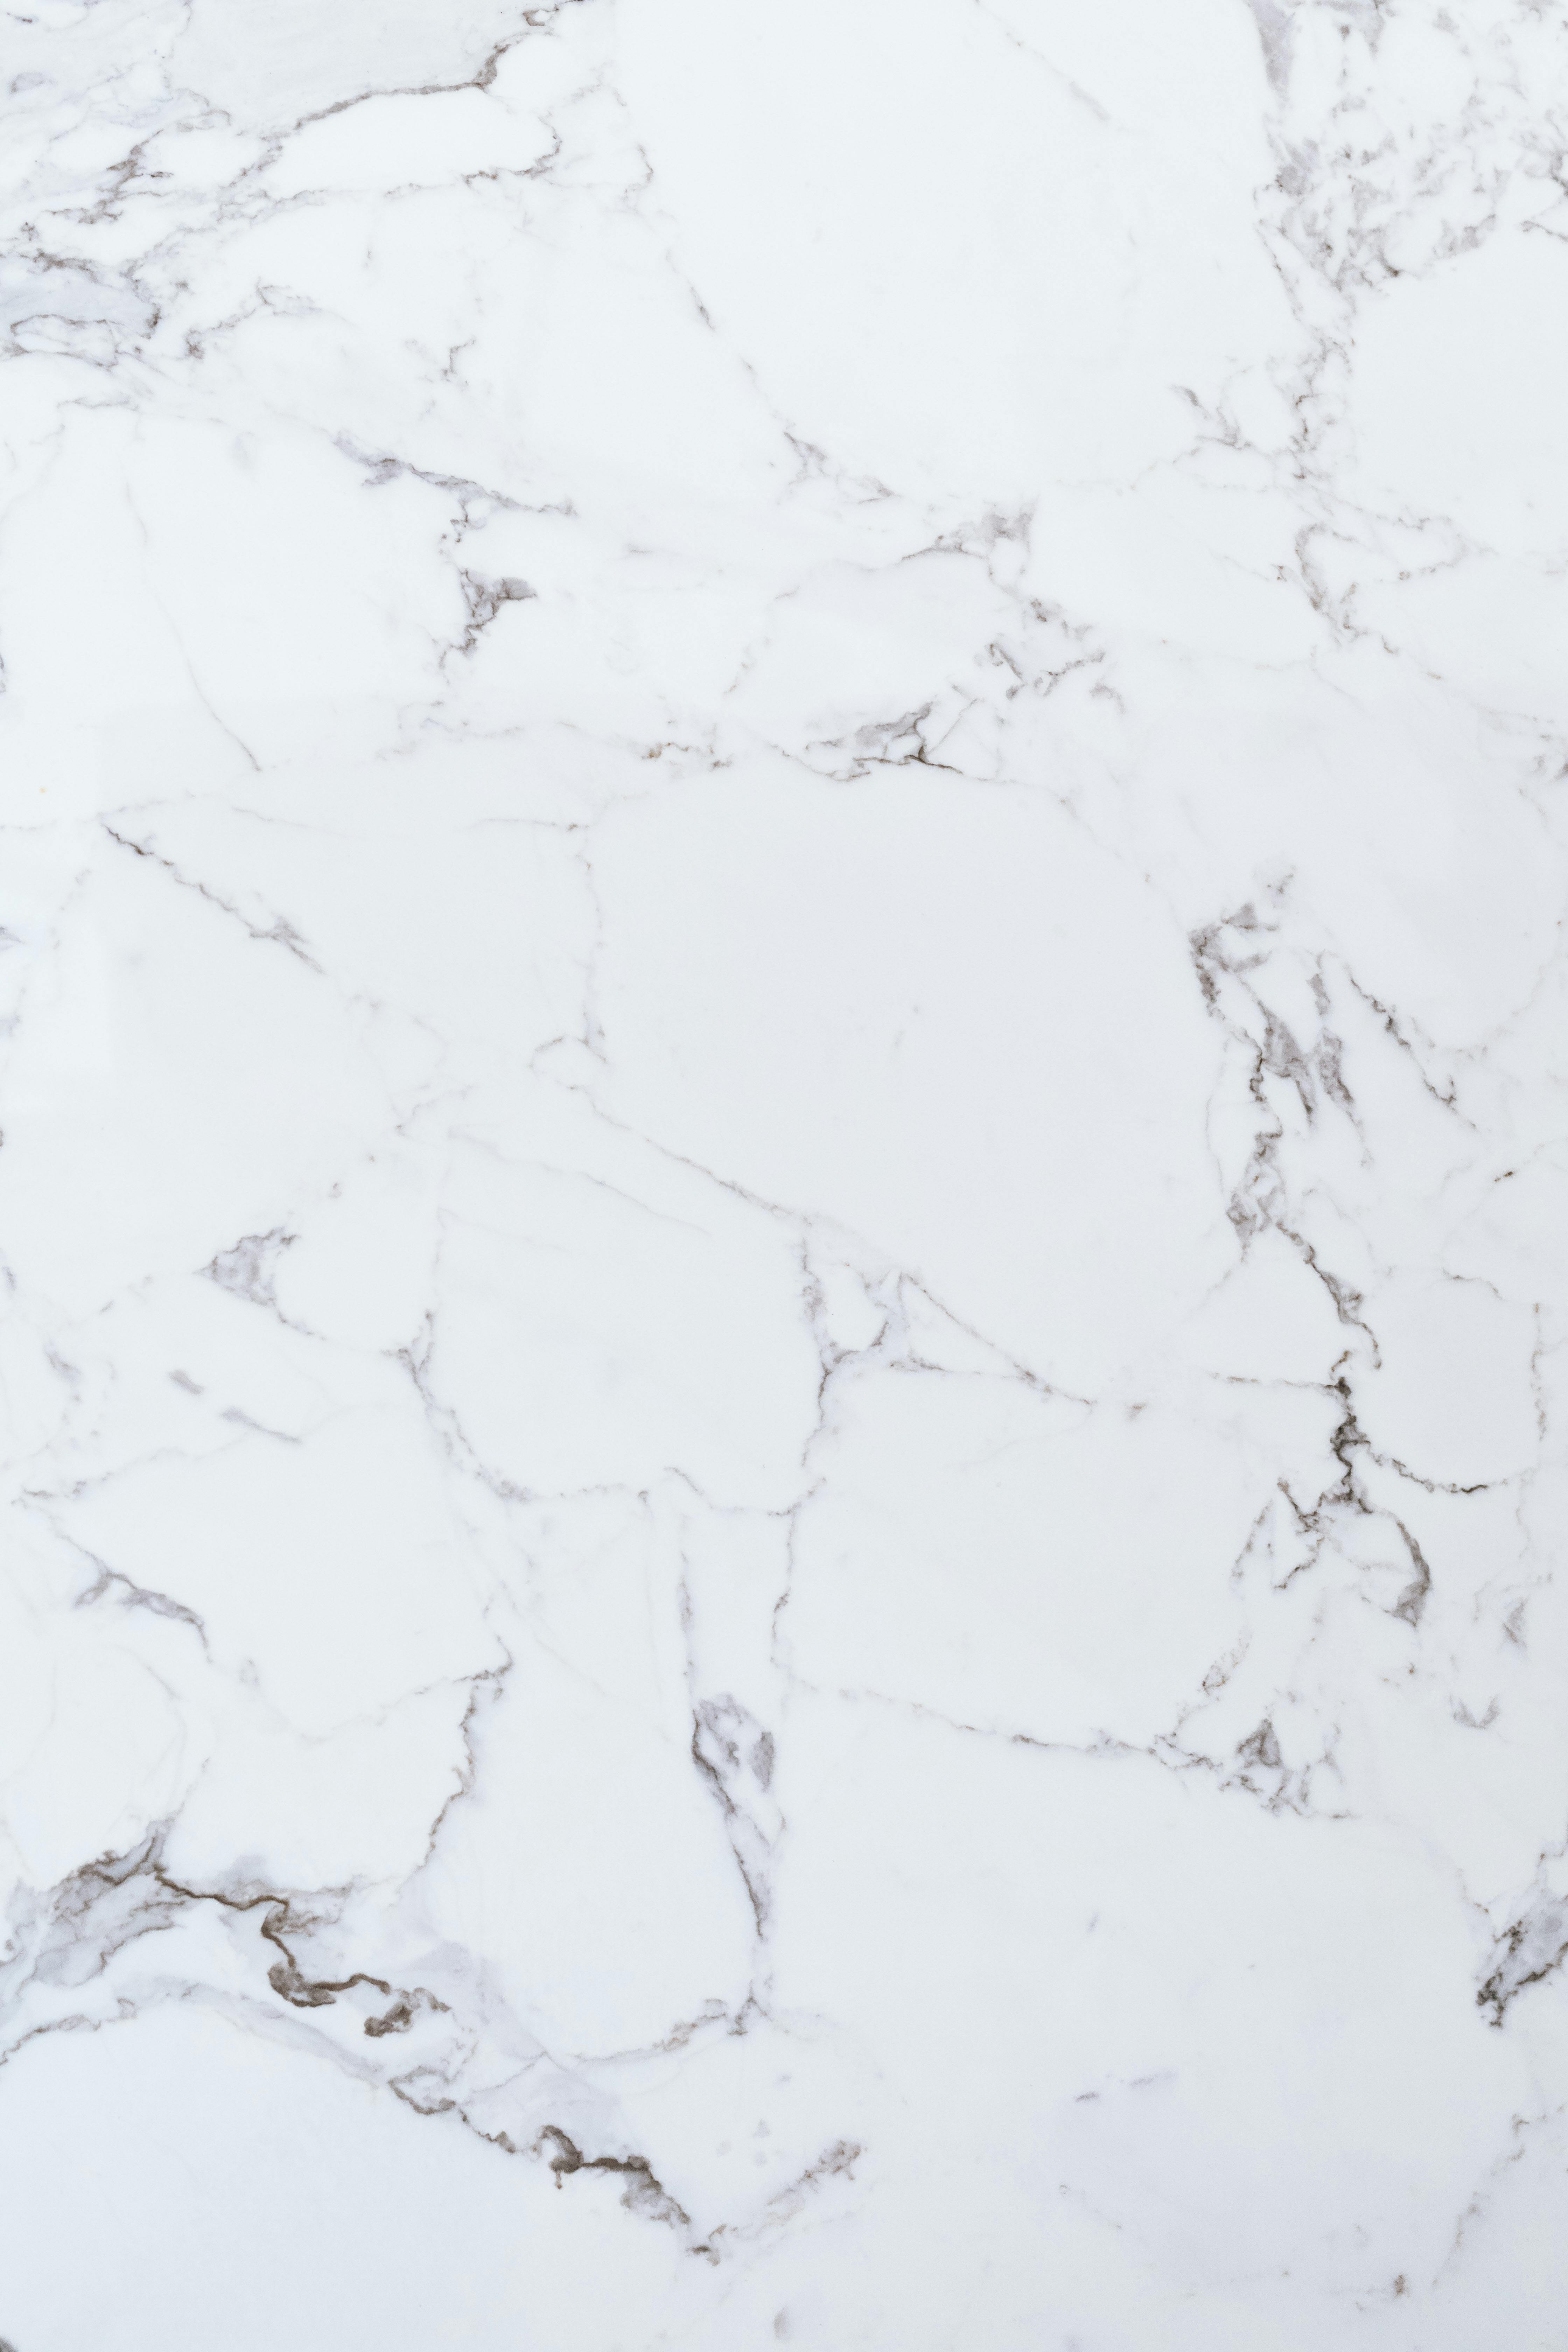 White Marble Texture Background Detailed Structure Of Marble In Natural  Patterned For Design Stock Photo 59743733  Megapixl